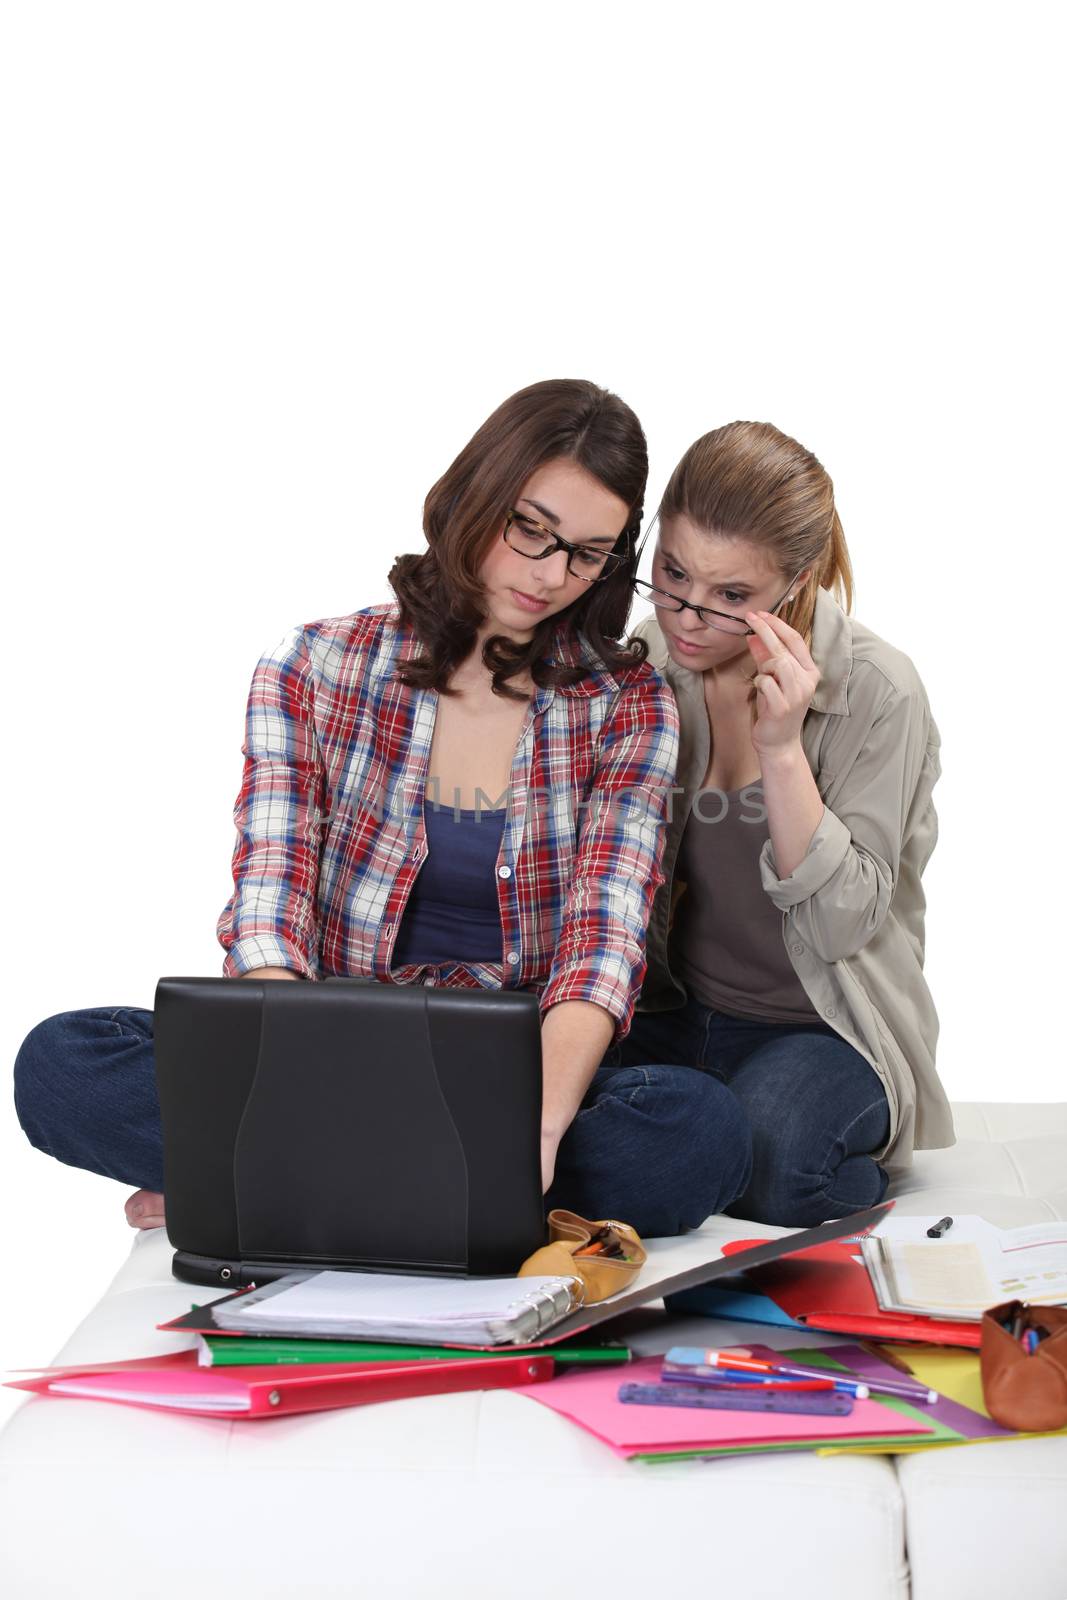 Female students working at a laptop by phovoir